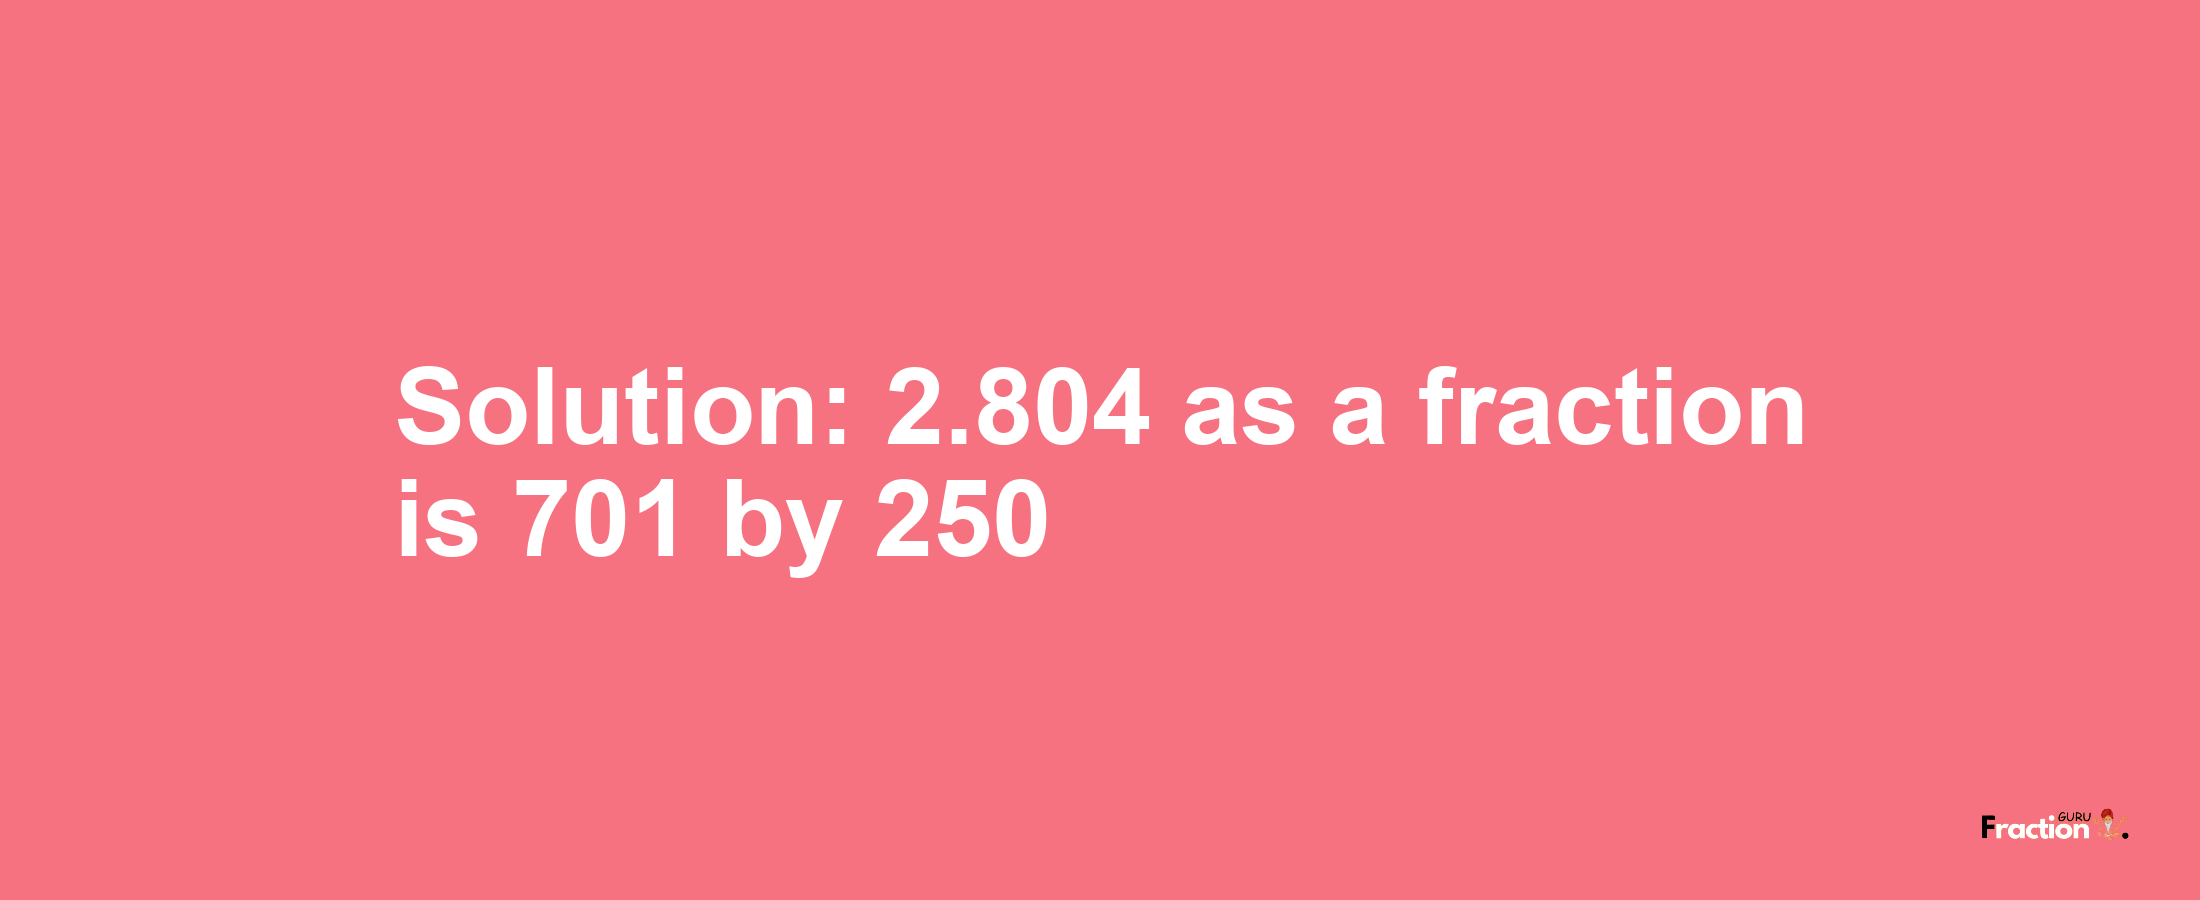 Solution:2.804 as a fraction is 701/250